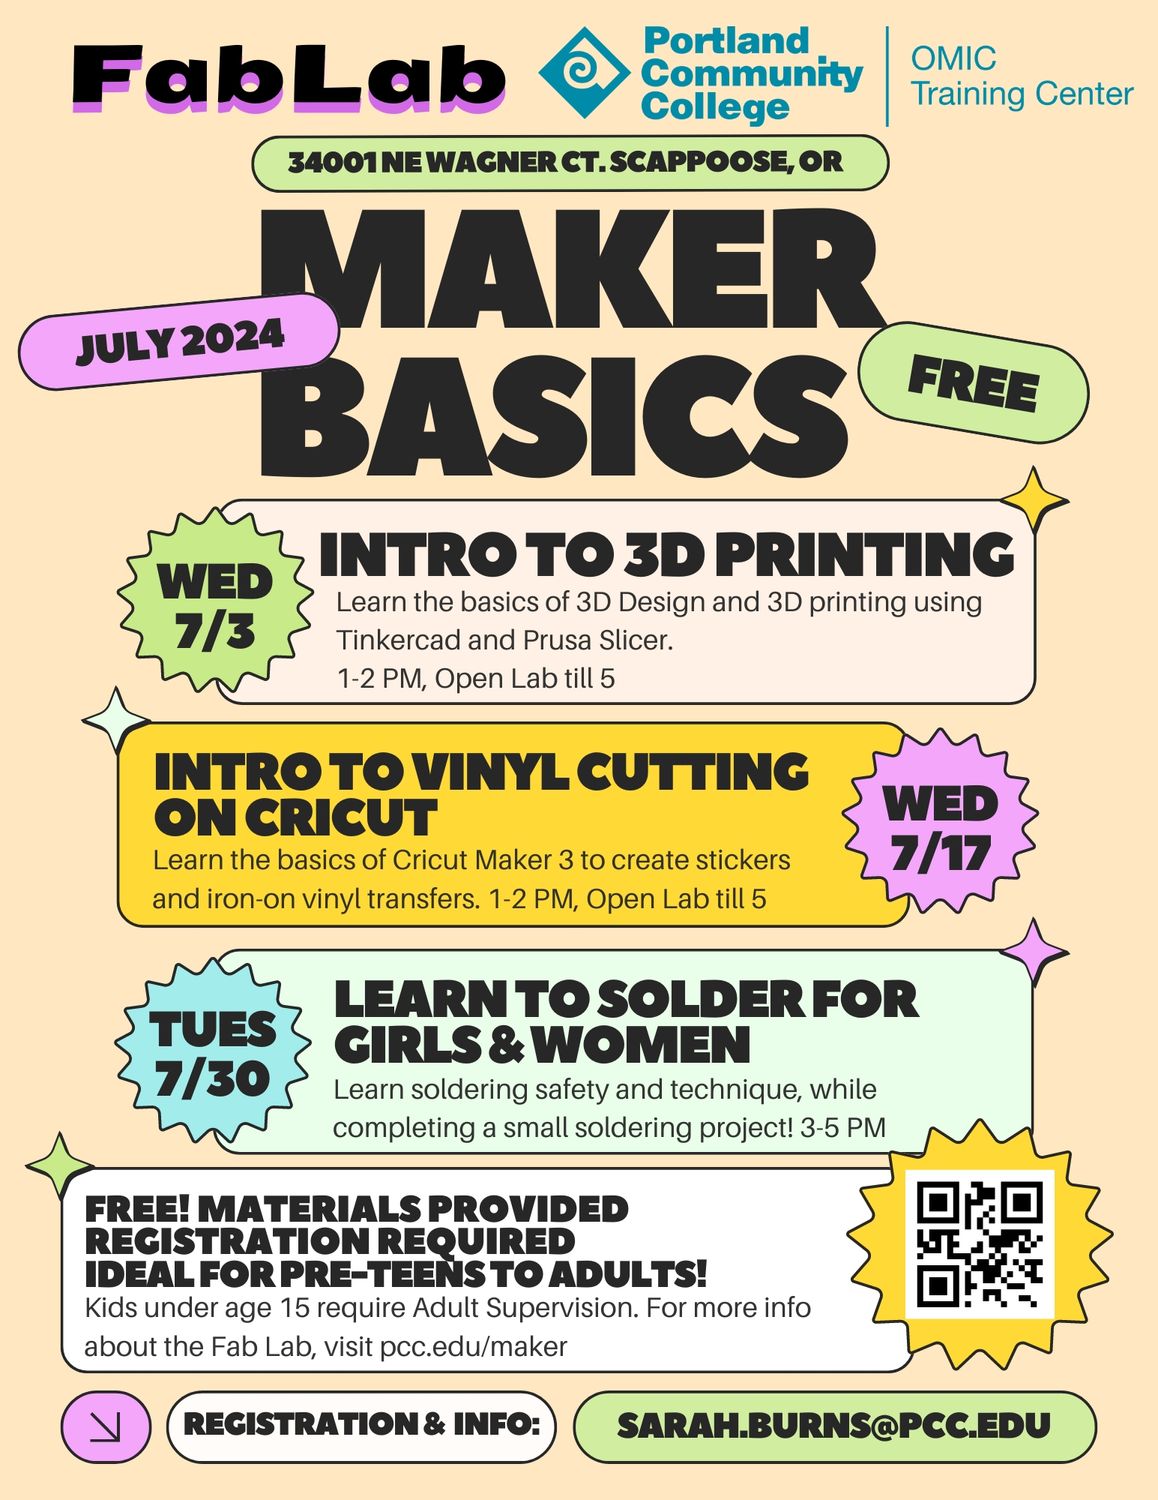 Fab Lab
Omic Training Center
Portland Community College
34001 NE Wagner Ct. Scappoose, Or
July 2024

Wed 7/3
Intro to 3D Printing
Learn the basics of 3d design and 3d printing using tinkercad and prusaslicer.
1-2 pm, open lab til 5

Wed 7/17
Intro to Vinyl Cutting On Cricut
Learn the basics of cricut maker 3 to create stickers and iron-on vinyl transfers. 
1-2 pm, open lab til 5

Tues 7/30
Learn To Solder For Girls & Women
Learn soldering safety and technique, while completing a small soldering project!
3-5 pm

Free materials provided!
Registration required
Ideal for pre-teens to adults!
Kids under age 15 require adult supervision.
For more info about the fab lab, visit pcc.Edu/maker.
Registration & info: sarah.Burns@pcc.Edu